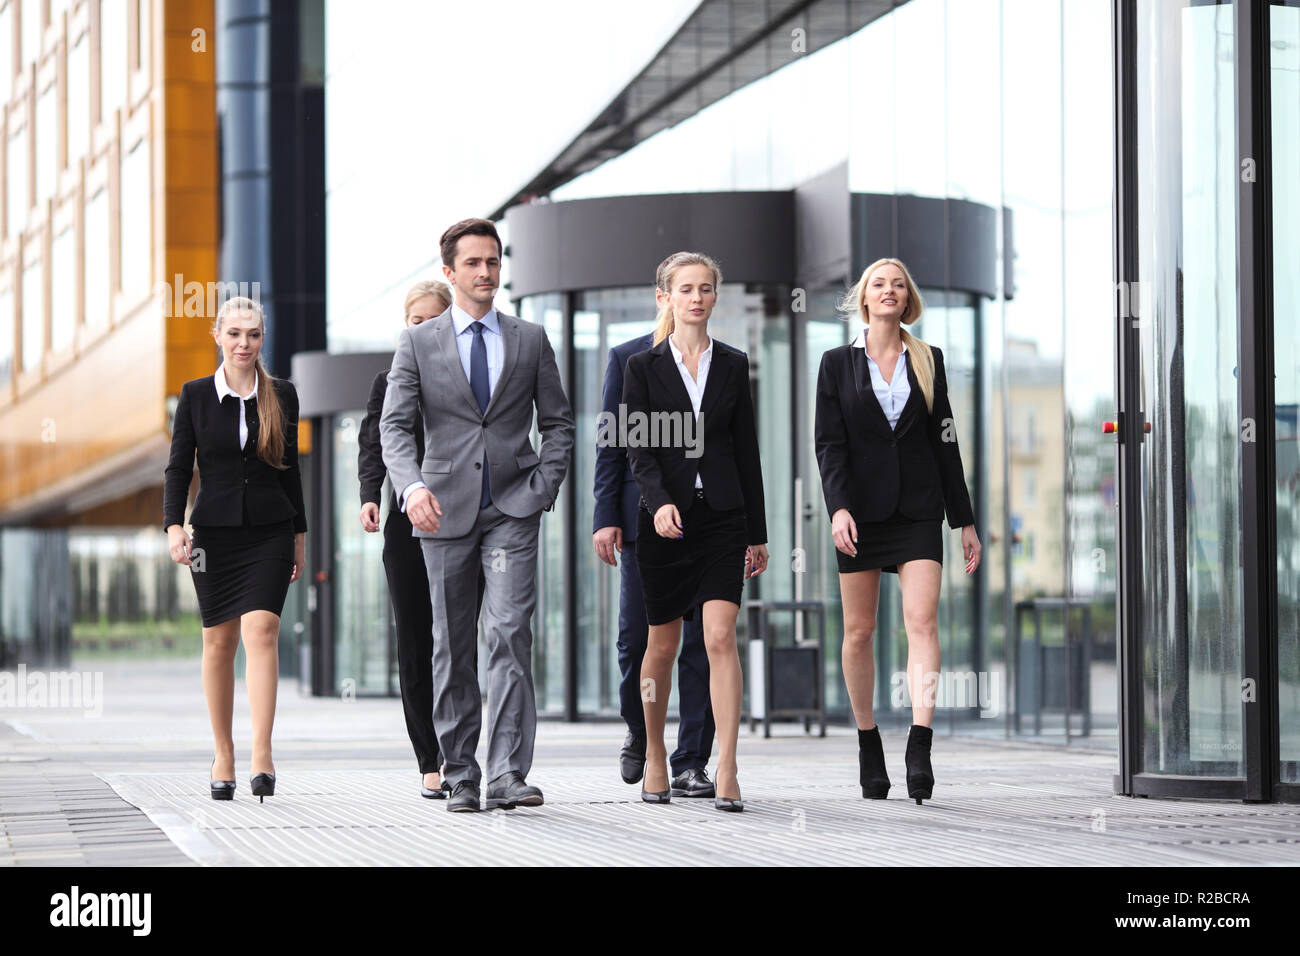 Portrait of successful business people team walking together outdoors near modern office building Stock Photo